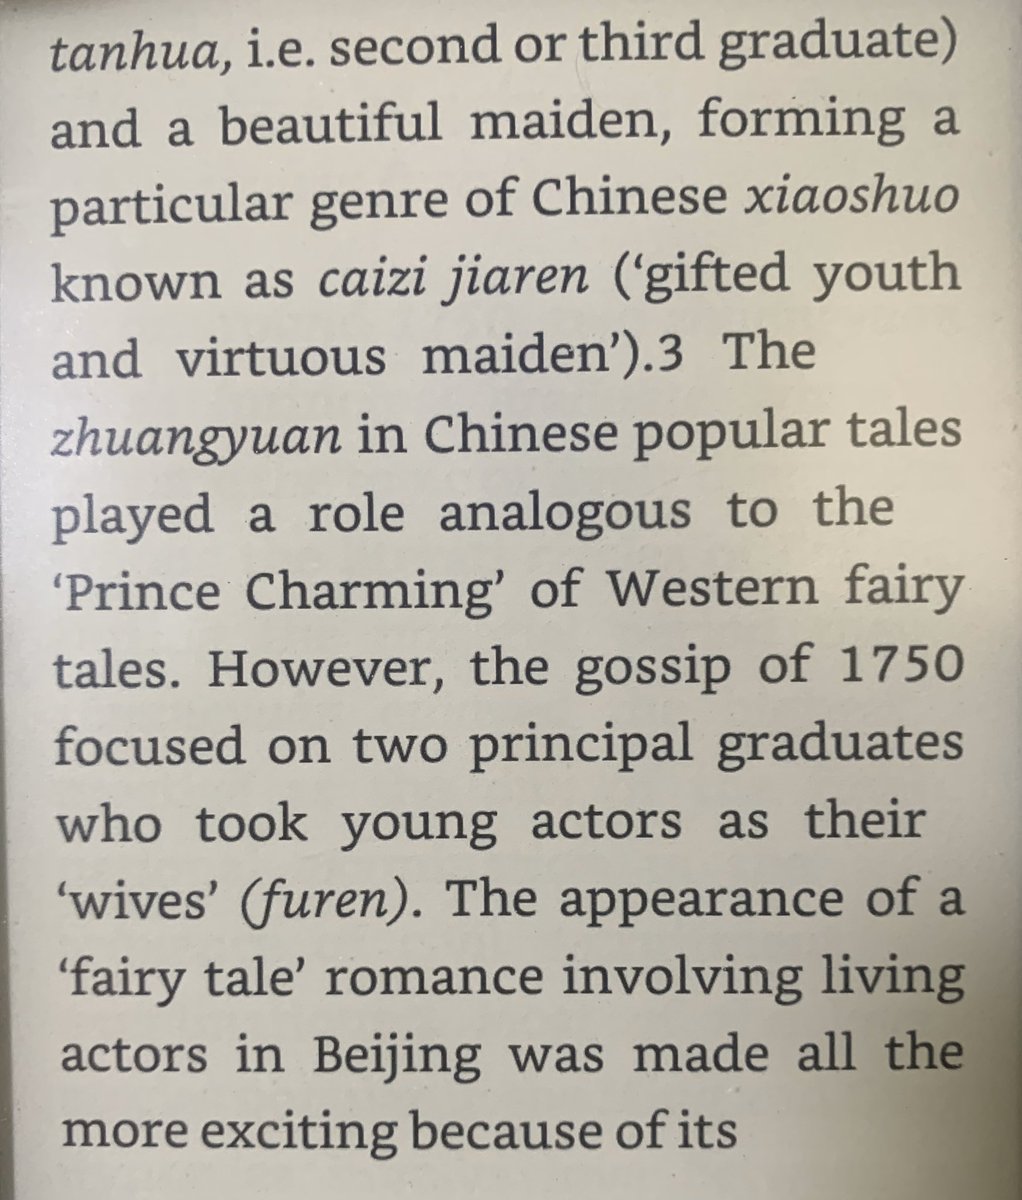 Again the mention of wife (furen)